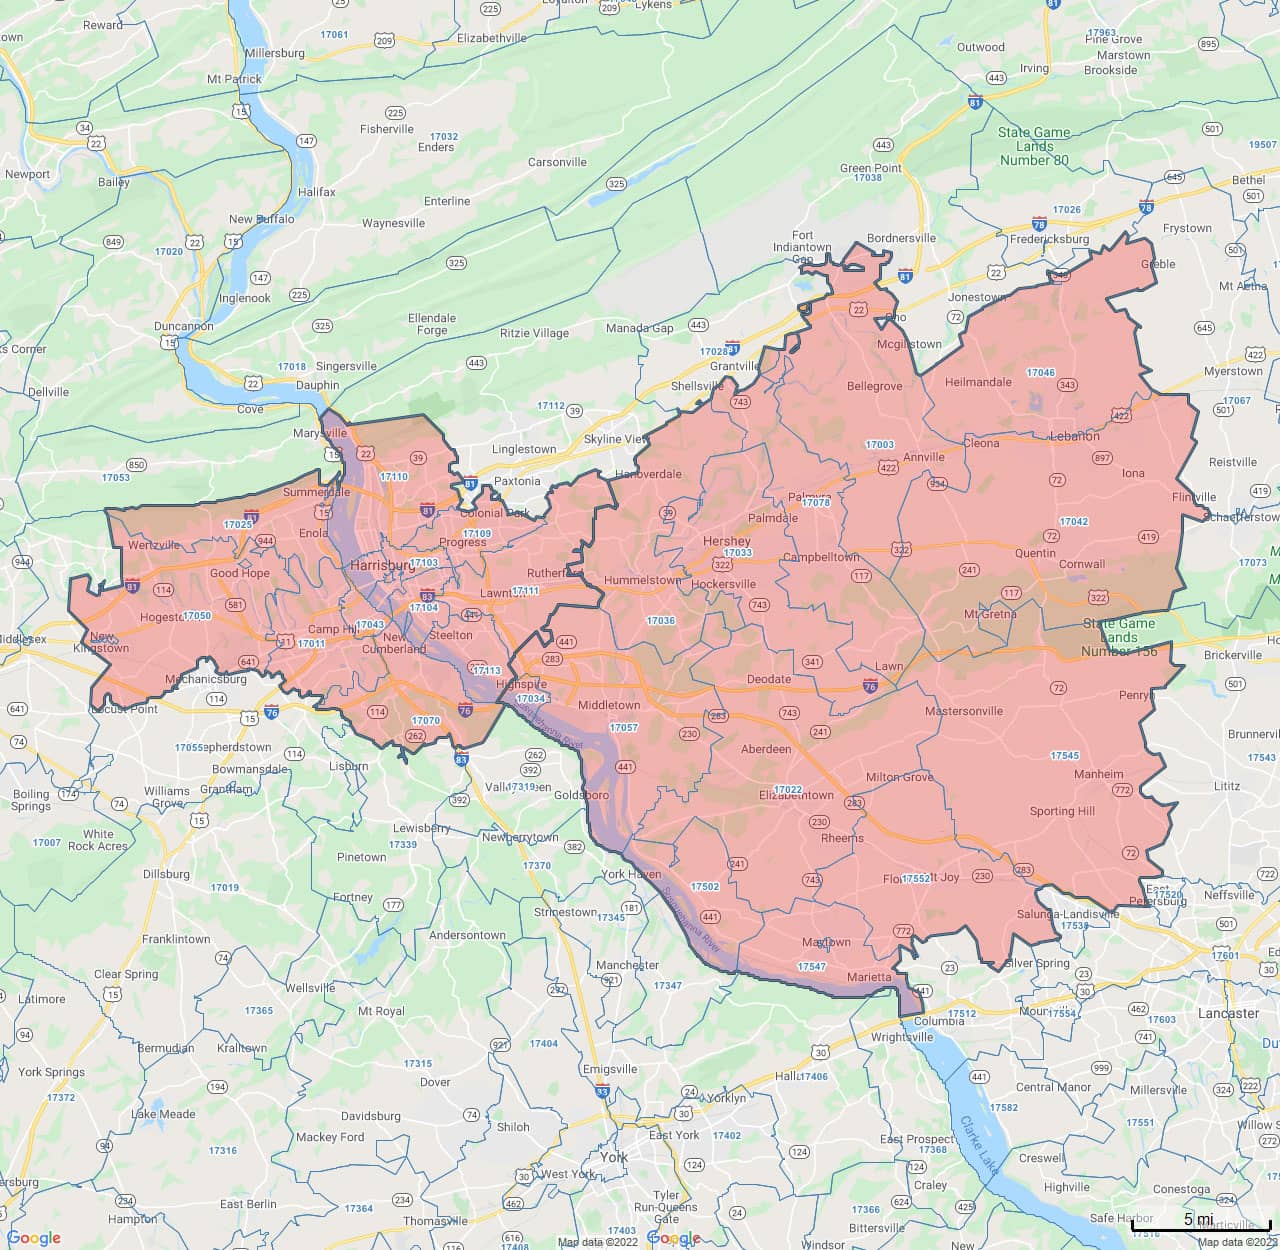 All Dry Services Area Coverage Map for Greater Harrisburg